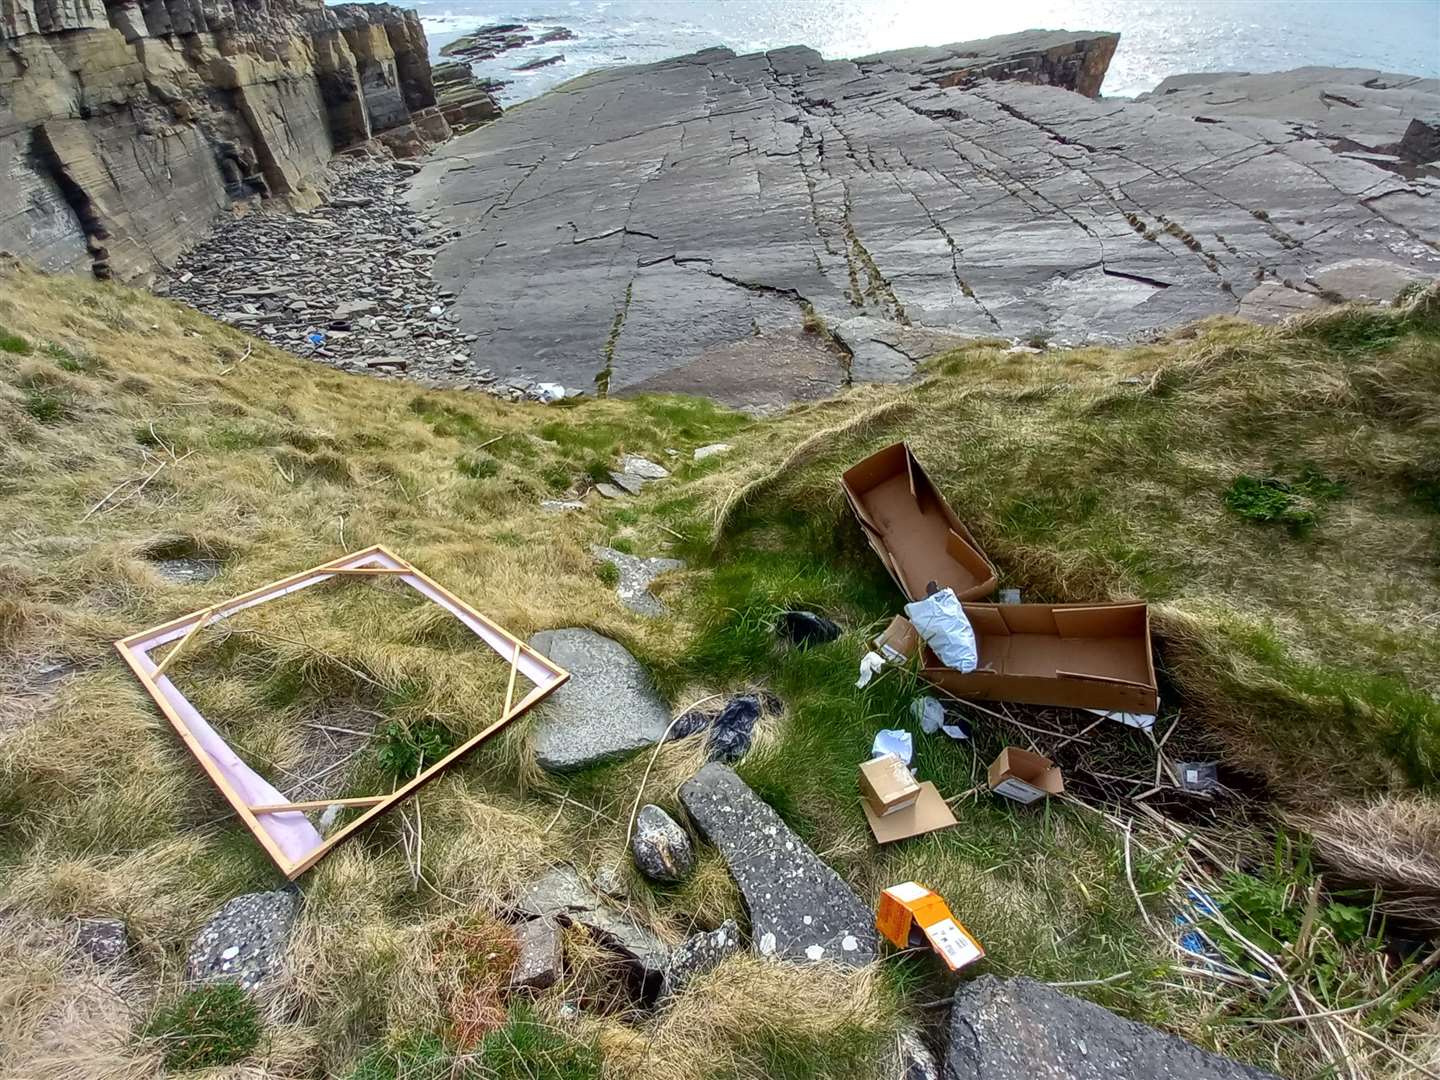 Some of the fly-tipped items encountered by Matt Towe near the Castle of Old Wick on Wednesday. He has reported the matter to Highland Council. Picture: Matt Towe